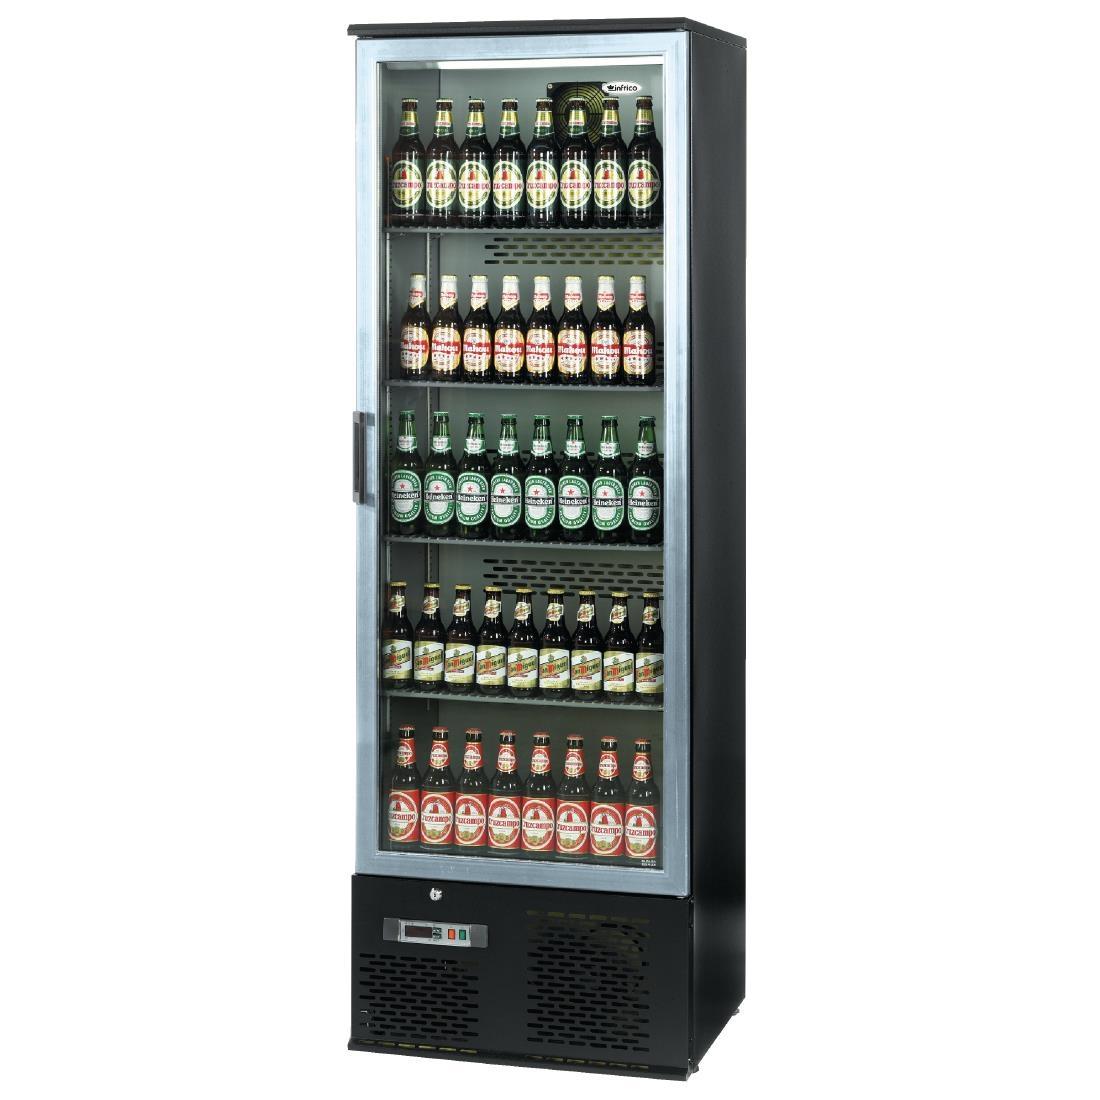 Infrico Upright Back Bar Cooler with Hinged Door in Black and Steel ZXS10 - CC608  - 1